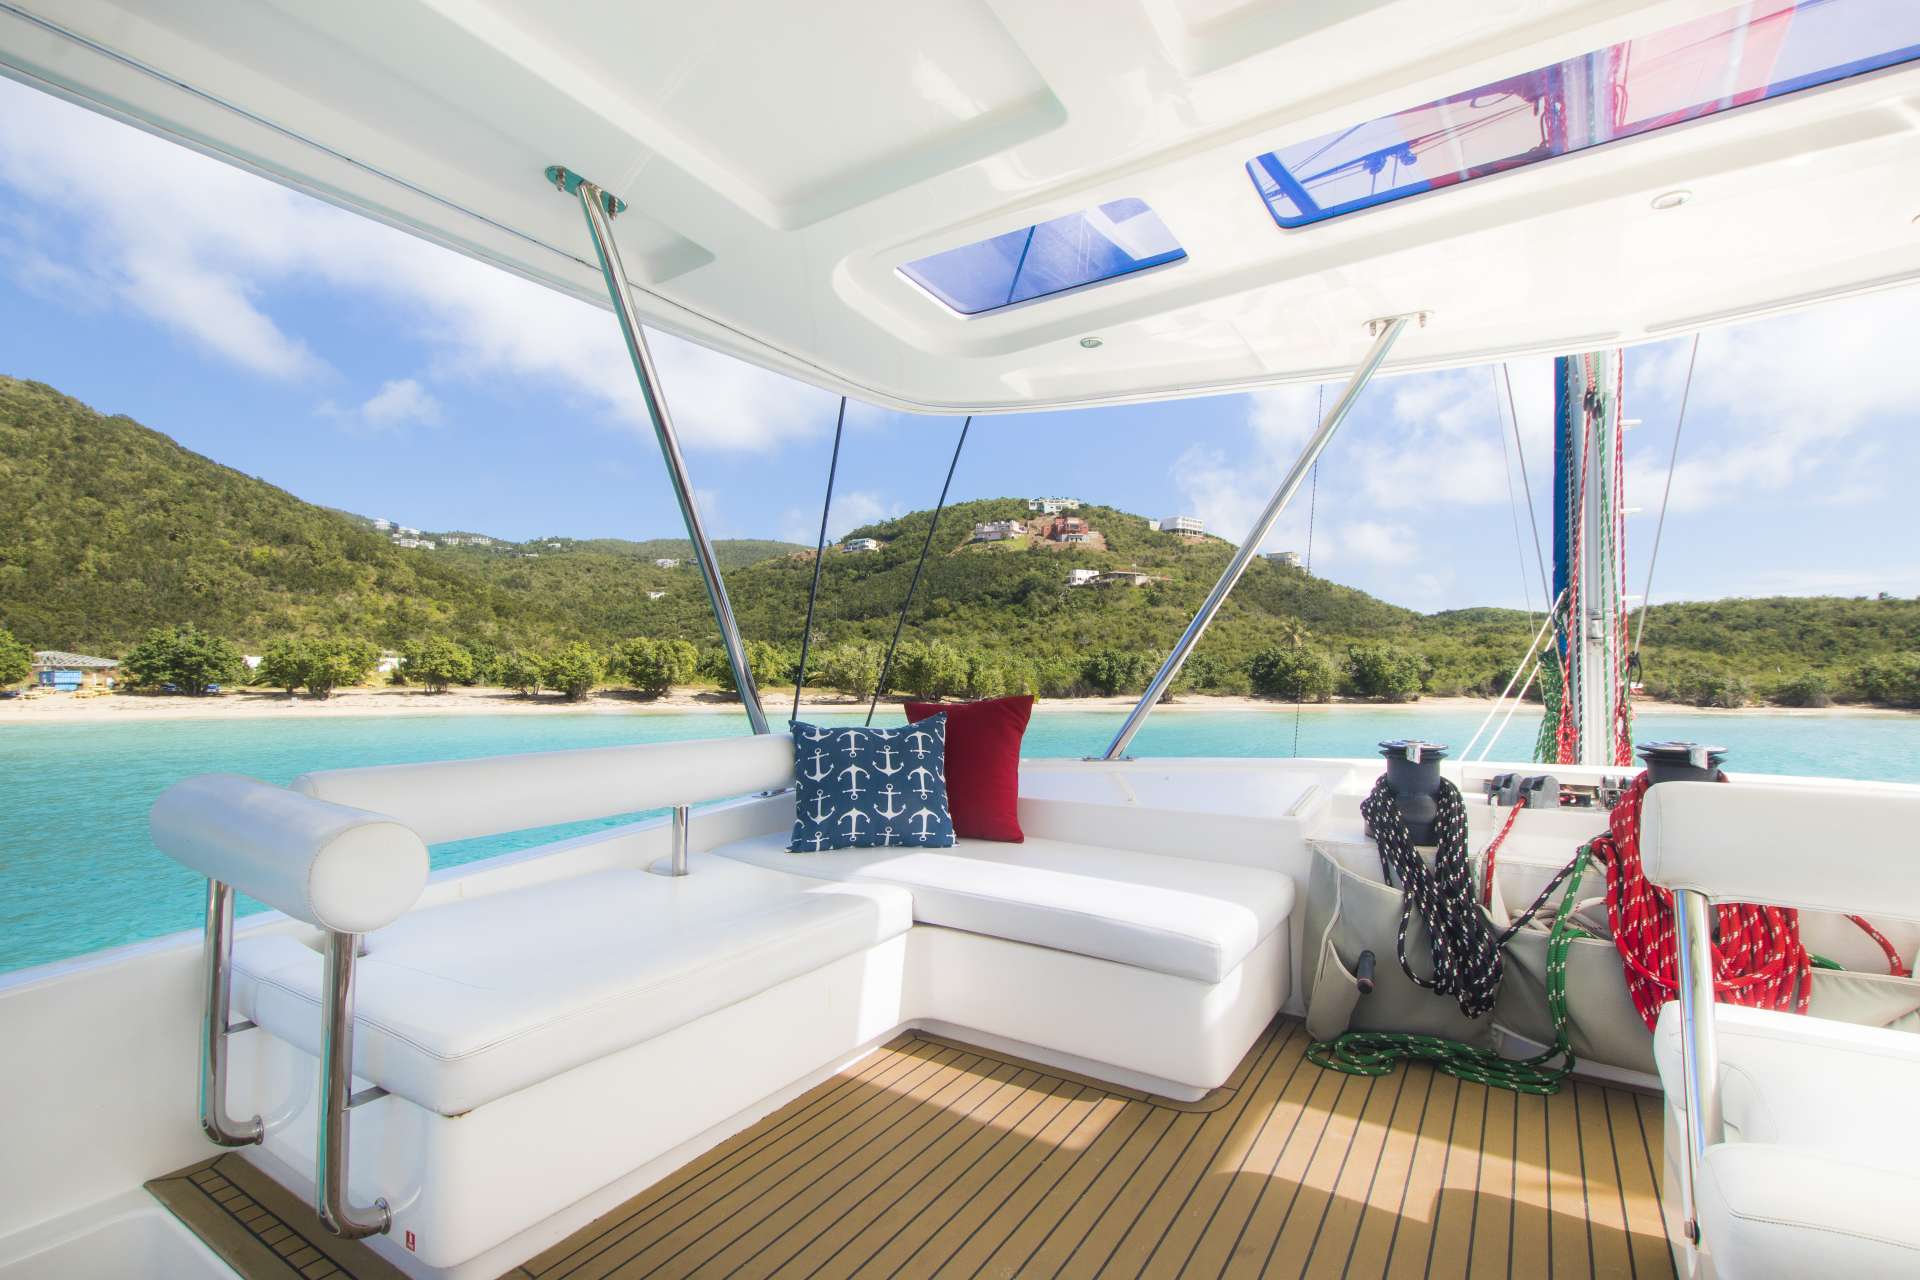 SEA ESTA Yacht Charter - The flybridge has ample seating and provides a shaded, breezy area for happy hour.